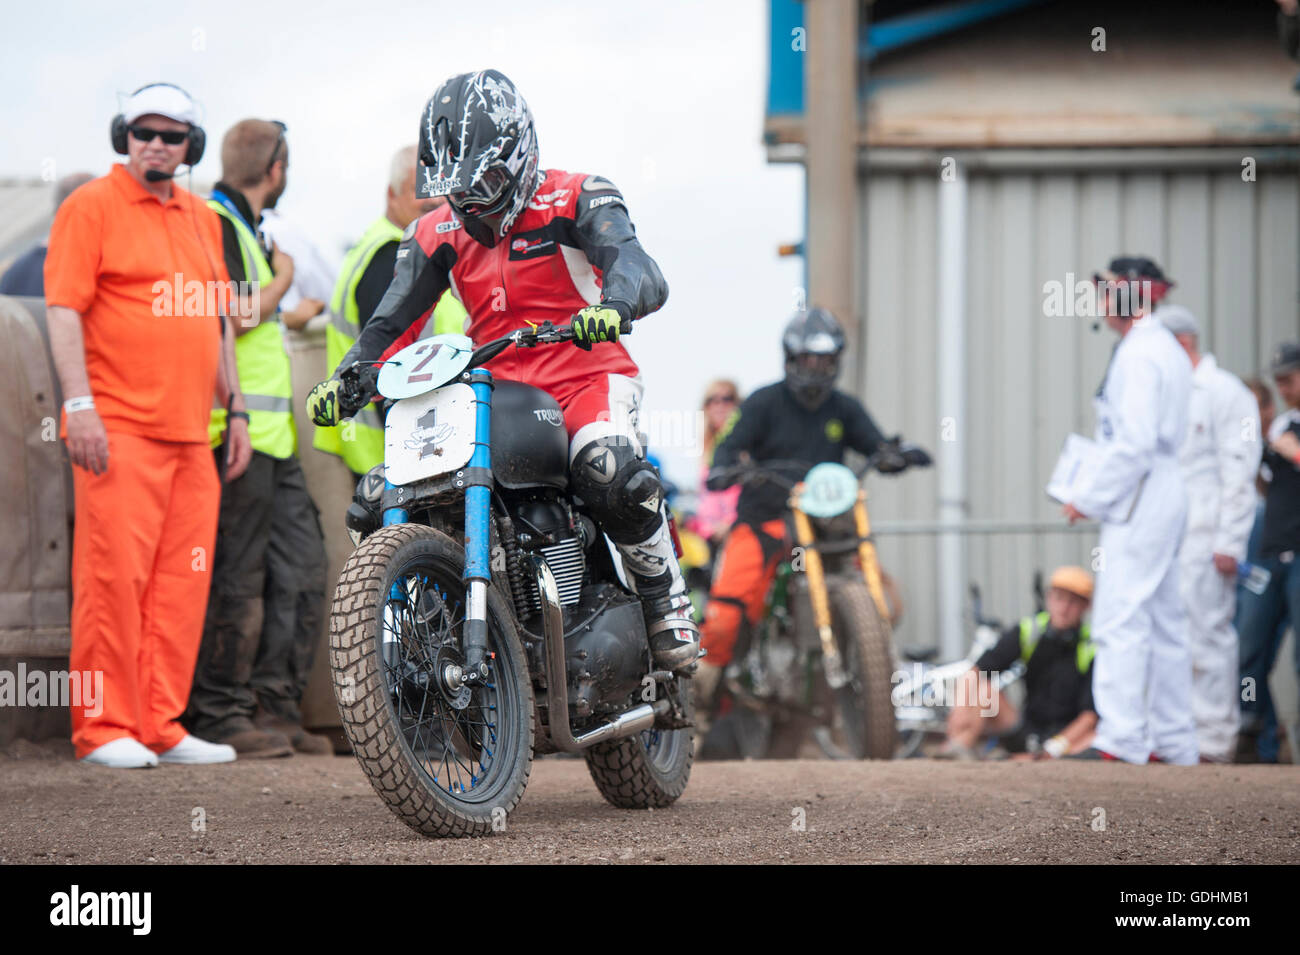 Kings Lynn, Norfolk, United Kingdom. 16.07.2016. Fifth annual Dirt Quake festival at the Adrian Flux Arena, Norfolk. Dirt Quake is racing road bikes on a dirt track. Lorry mechanic, Mortorbike Racer and TV celebrity Guy Martin races on a Crazy Horse Harley Davidson and World Superbike racer, Carl Fogerty MBE (pictured) races a Triumph. Classes include Inappropriate Road Bike, Ladies, and Street Tracker. Stock Photo